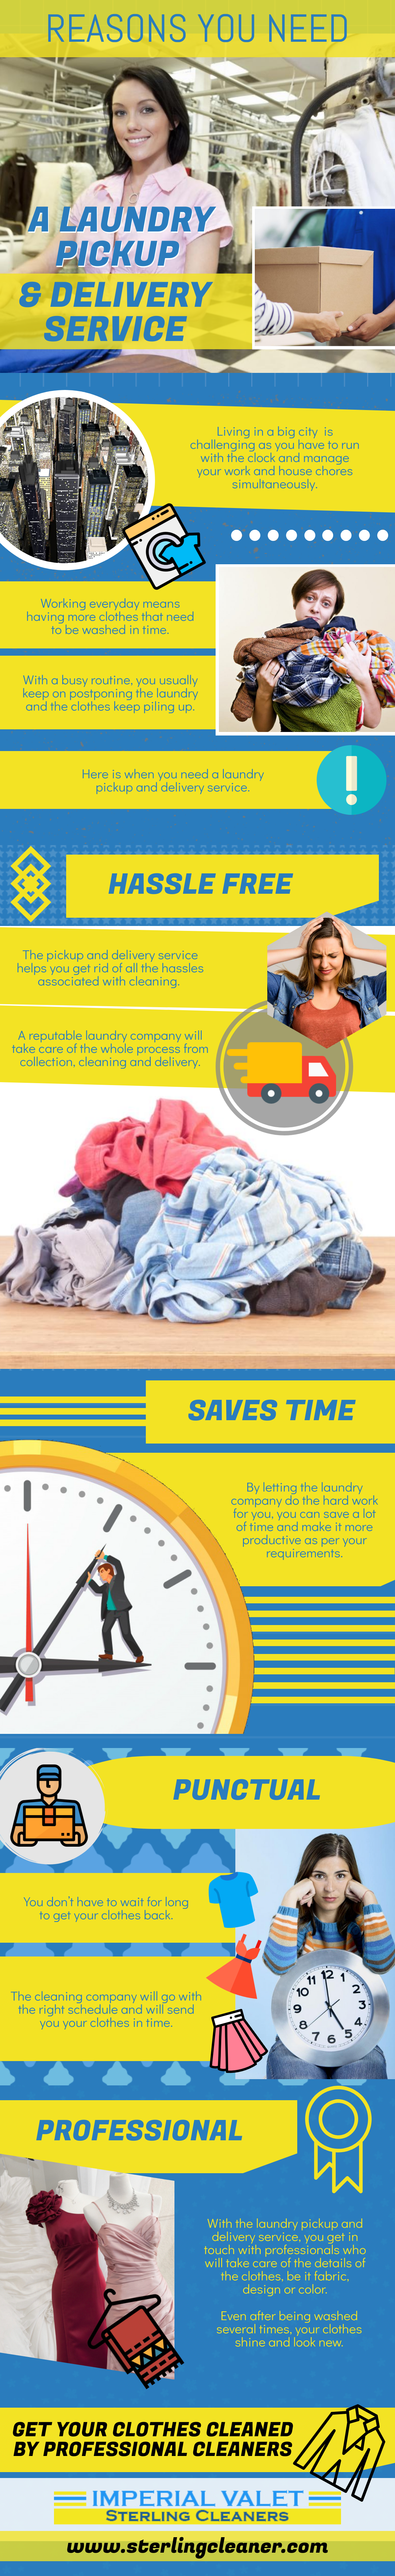 Reasons Why You Need A Laundry Pick and Delivery Service